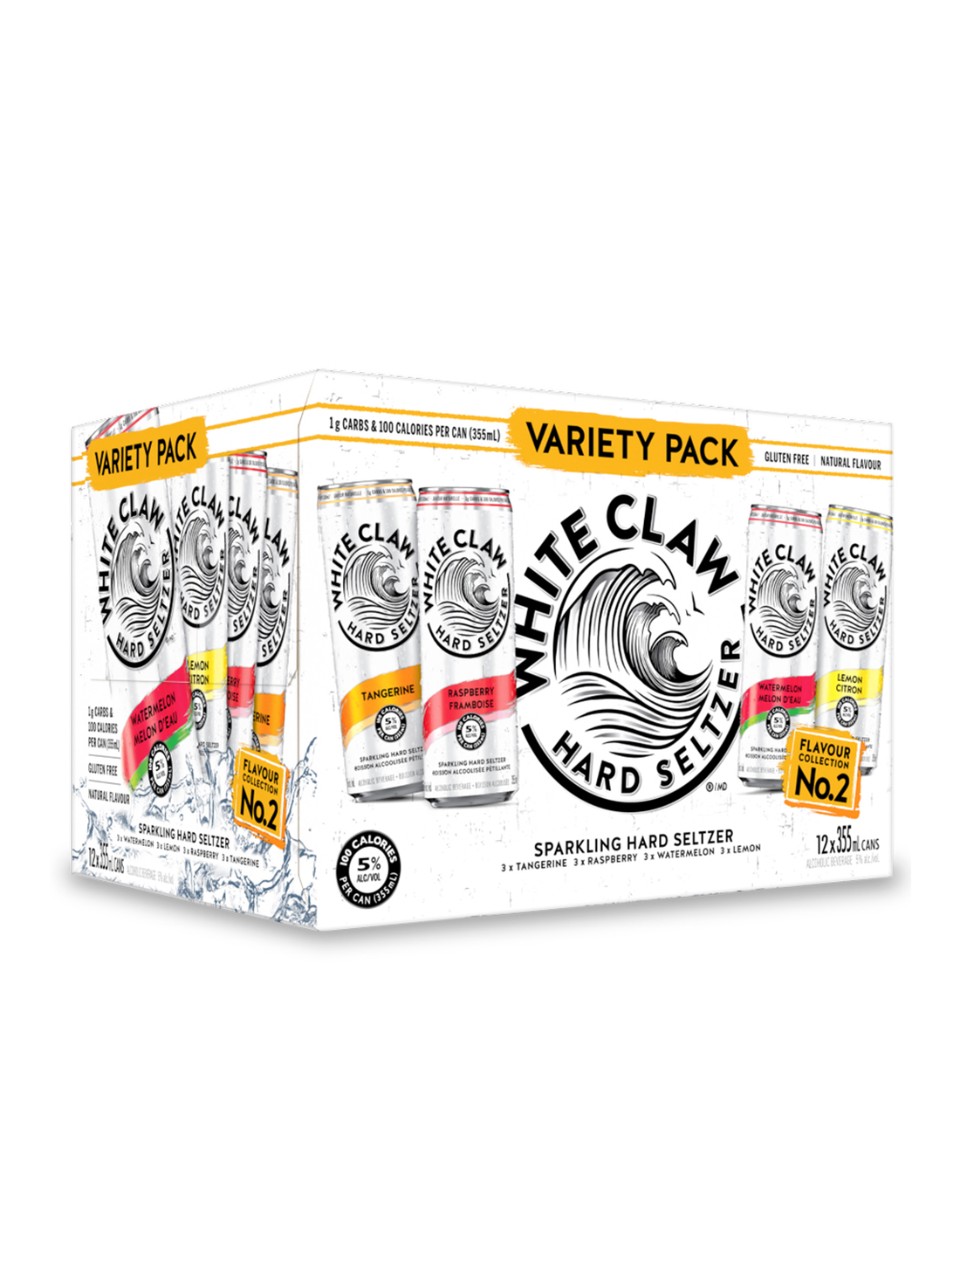 White Claw Variety Pack #2 (12 x 355 ml can)